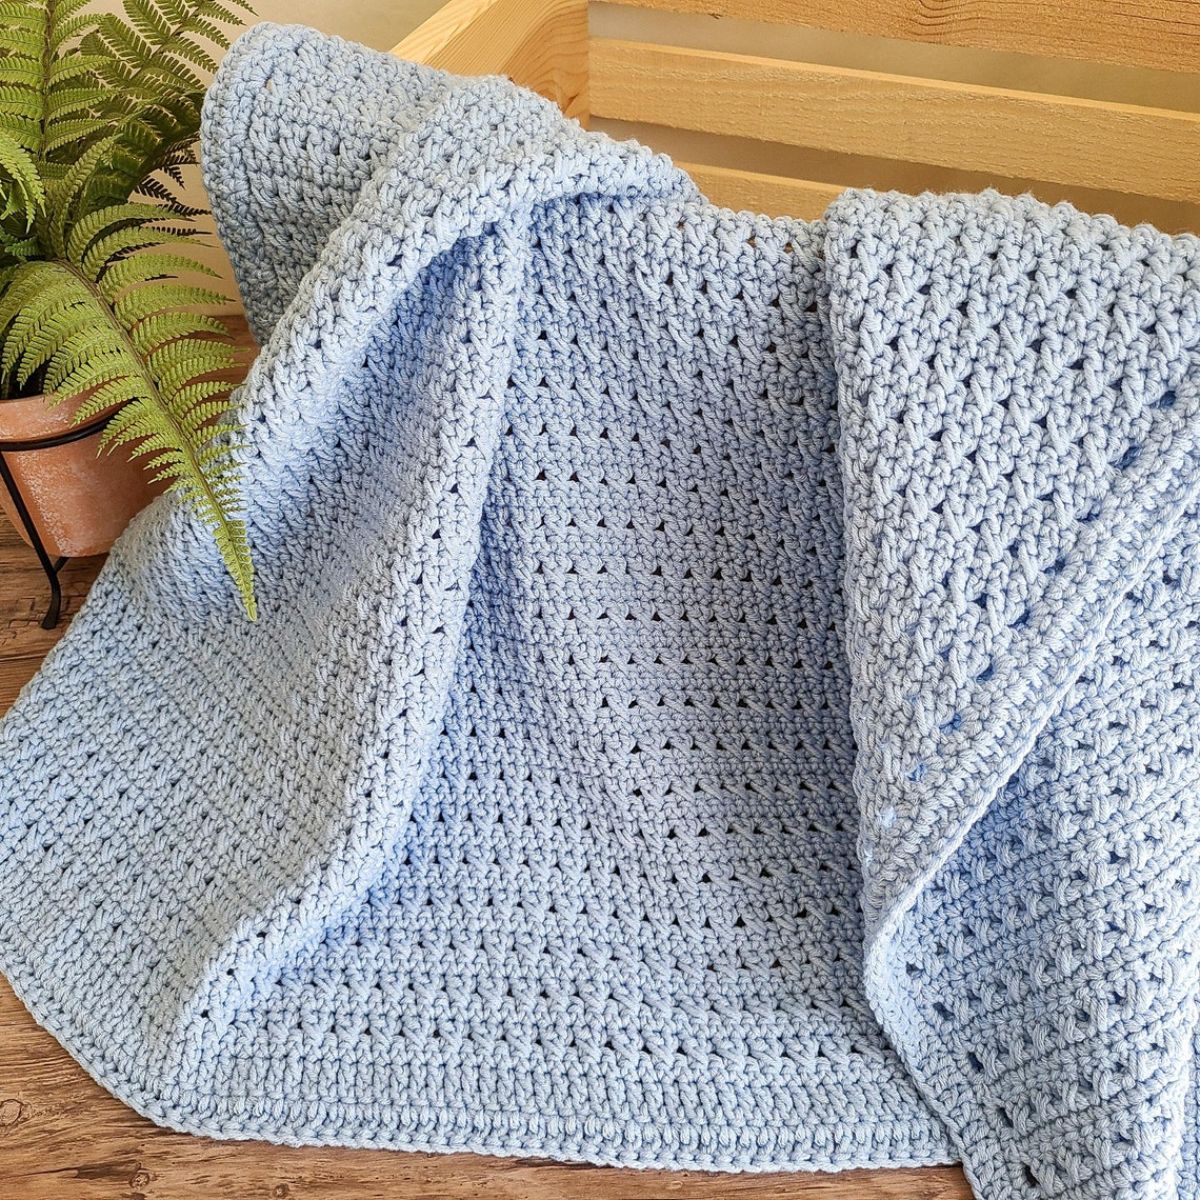 A blue crochet baby blanket spilling out of a wooden box next to a potted plant.